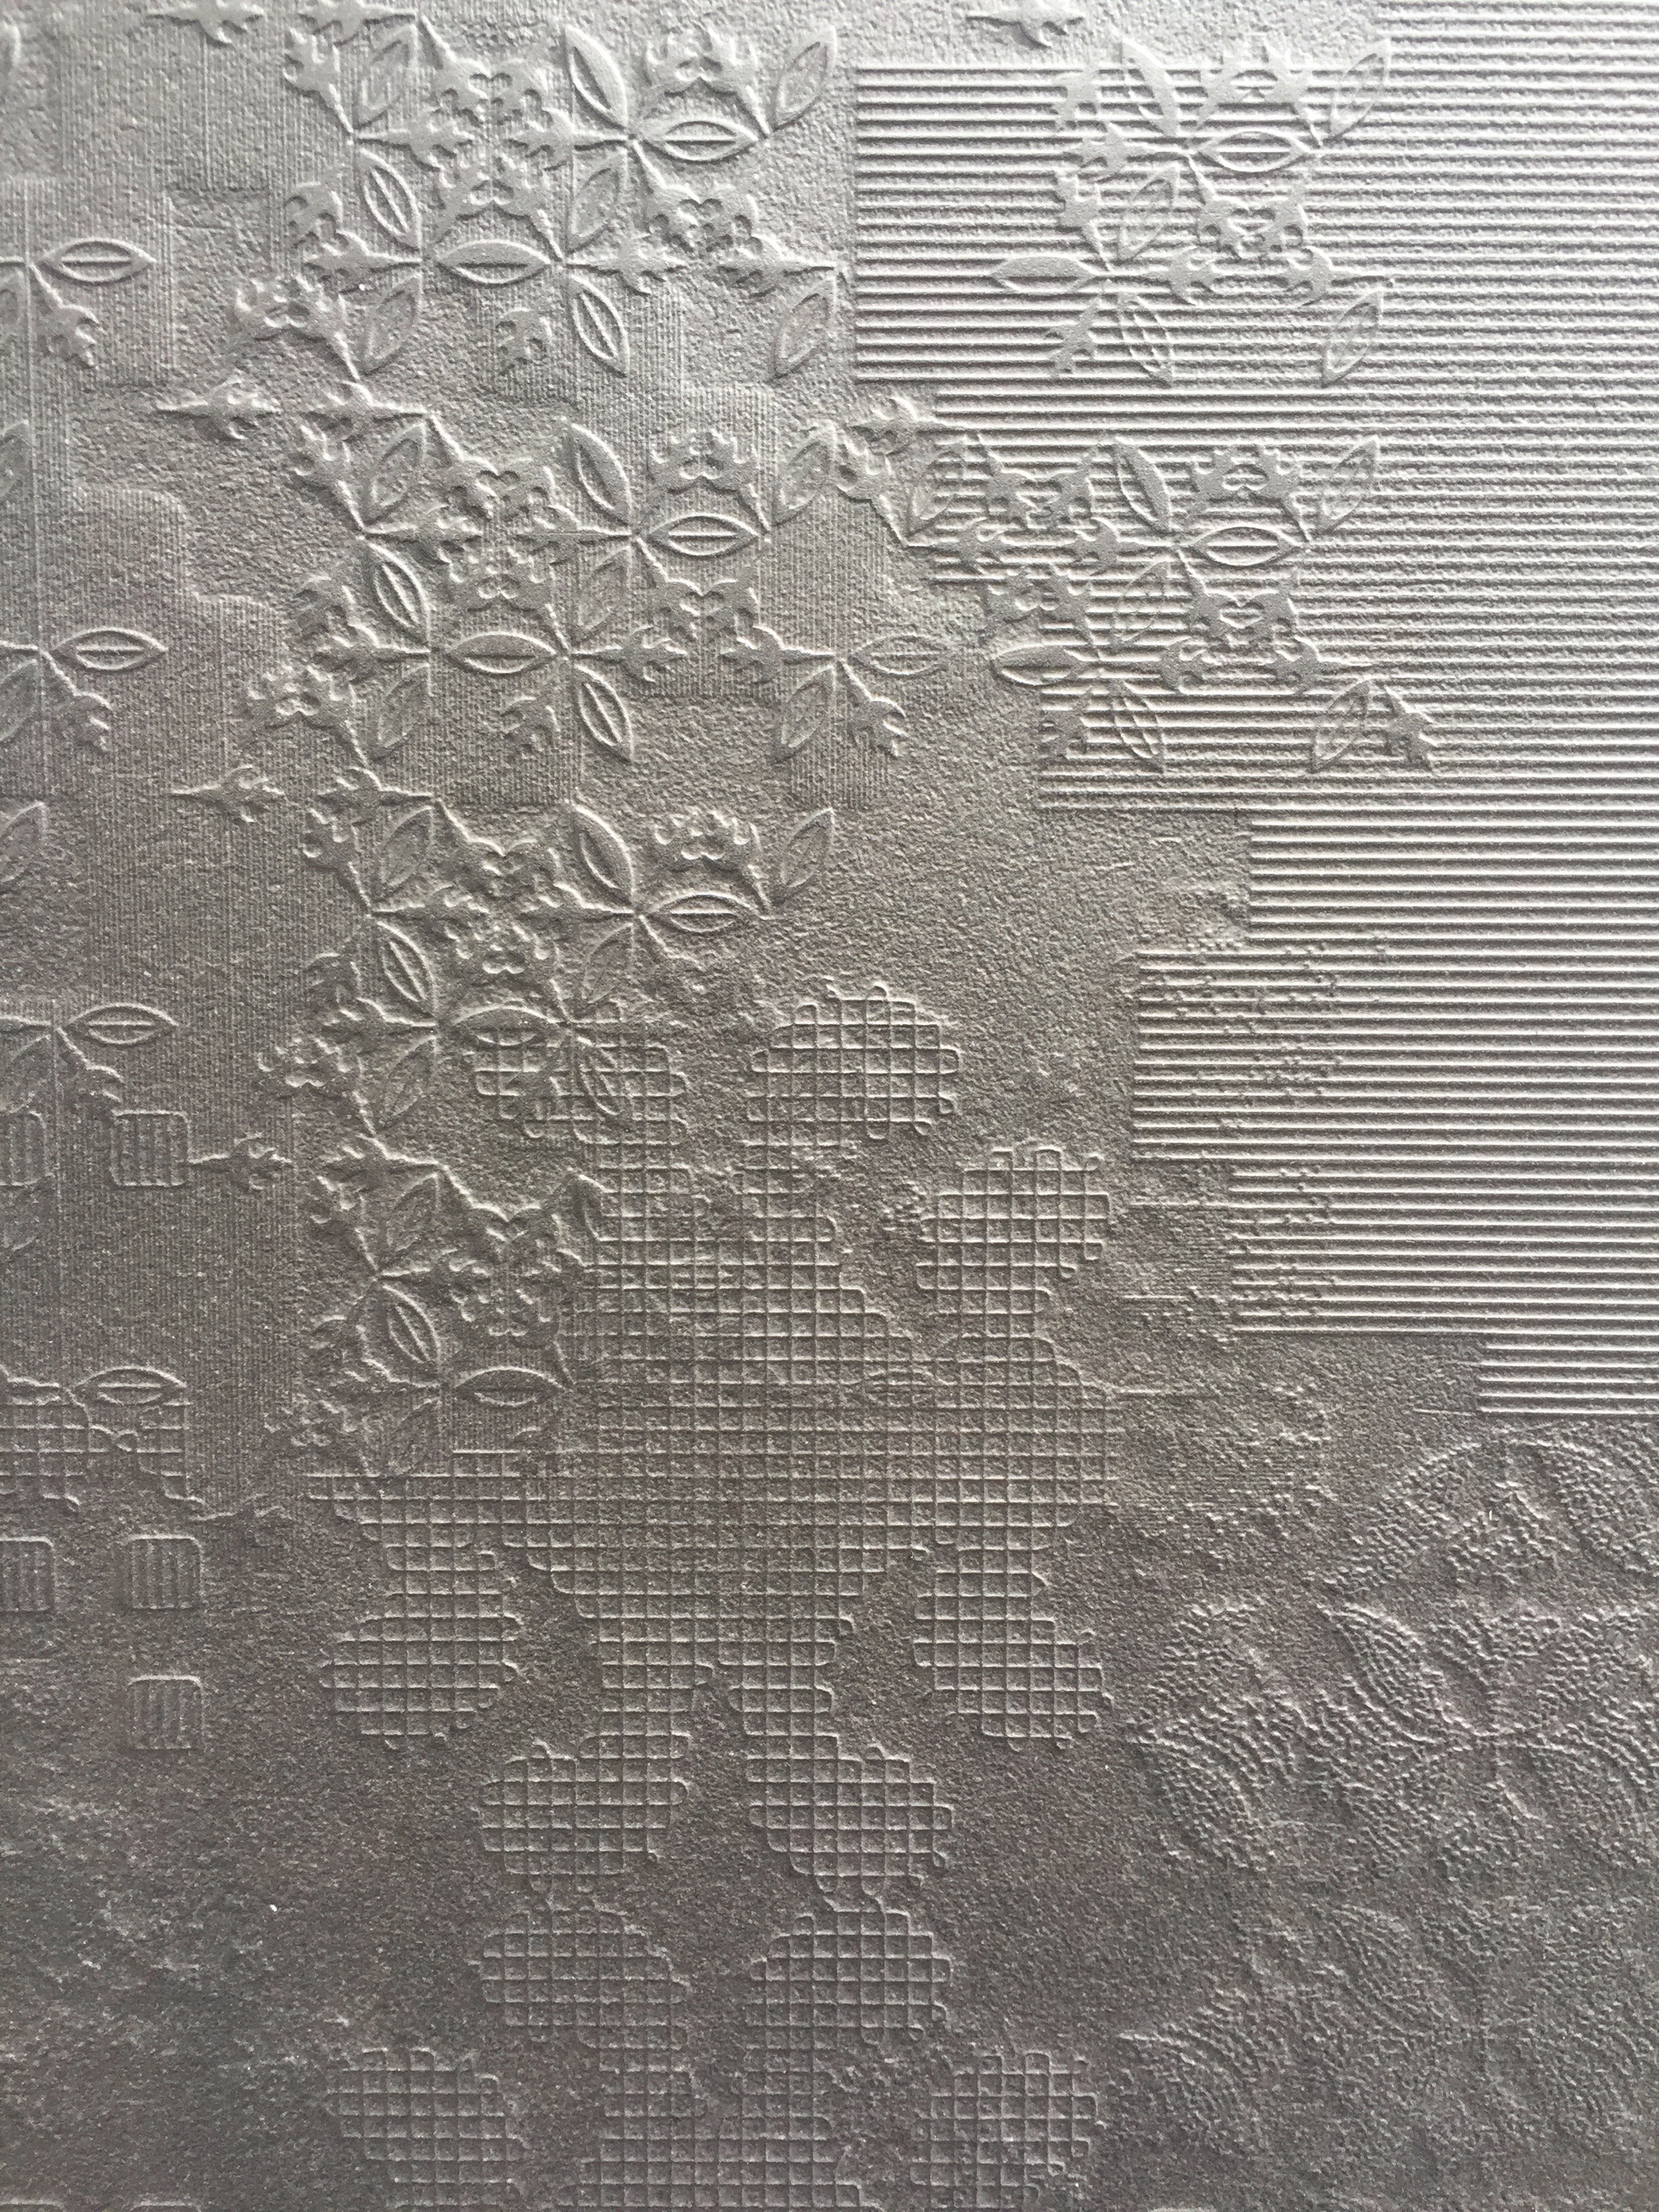 Heavily Embossed and Textured Papers